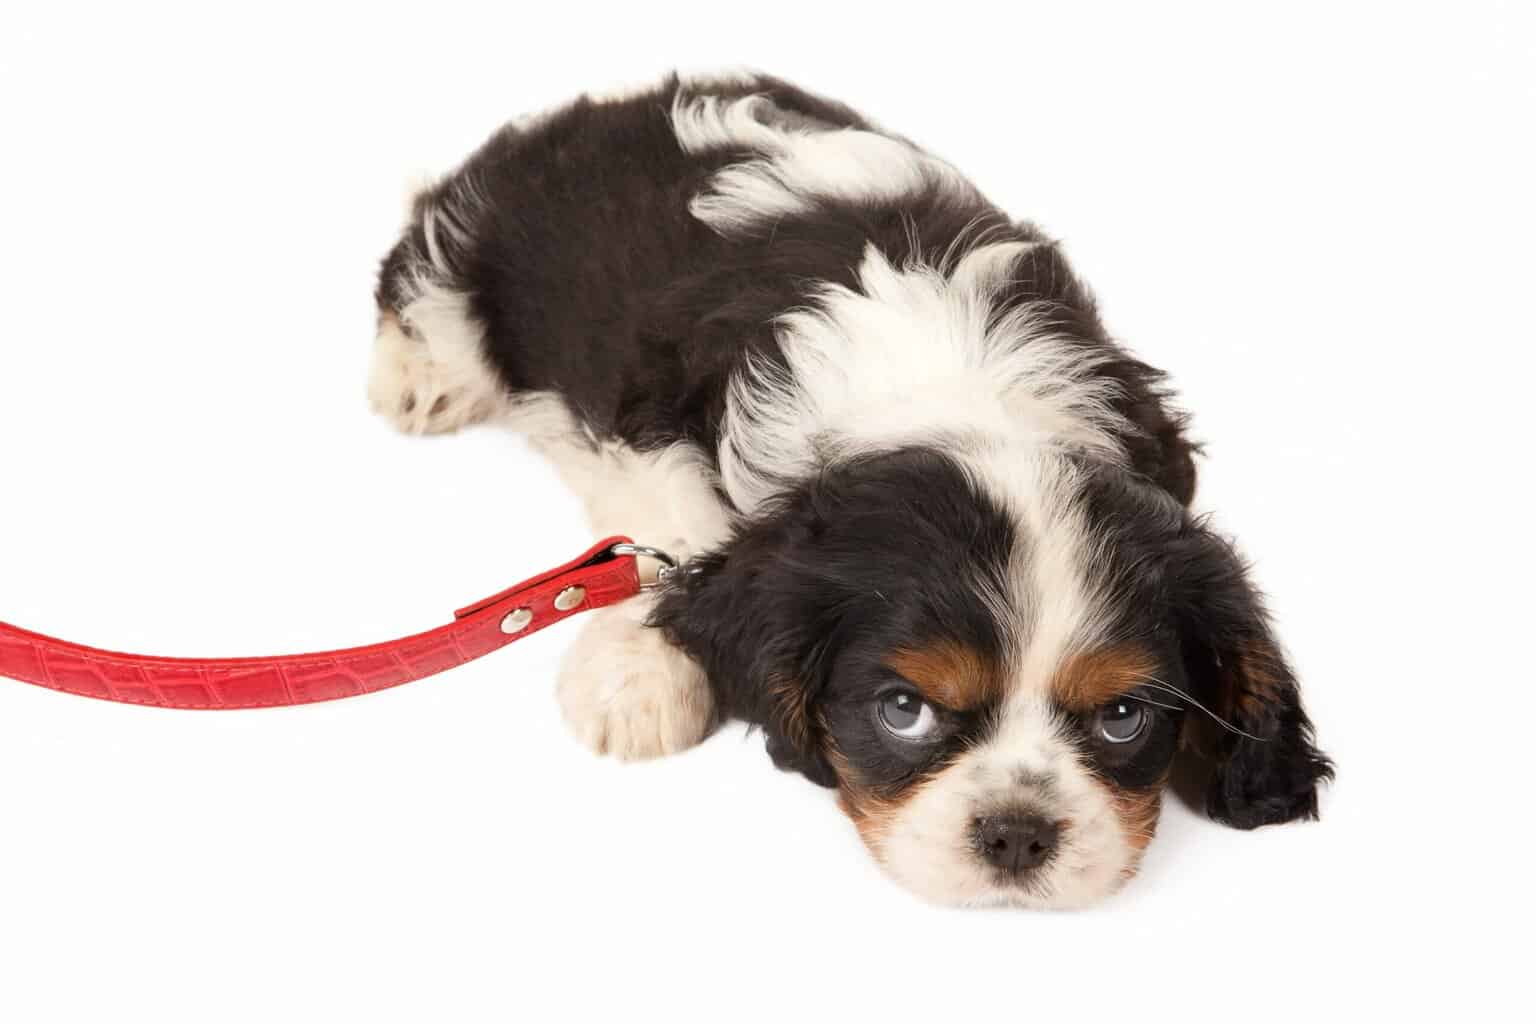 Angry puppy attached to red leash. Try these seven helpful tips to teach your stubborn puppy to behave. Be patient and consistent in helping your disobedient dog learn.